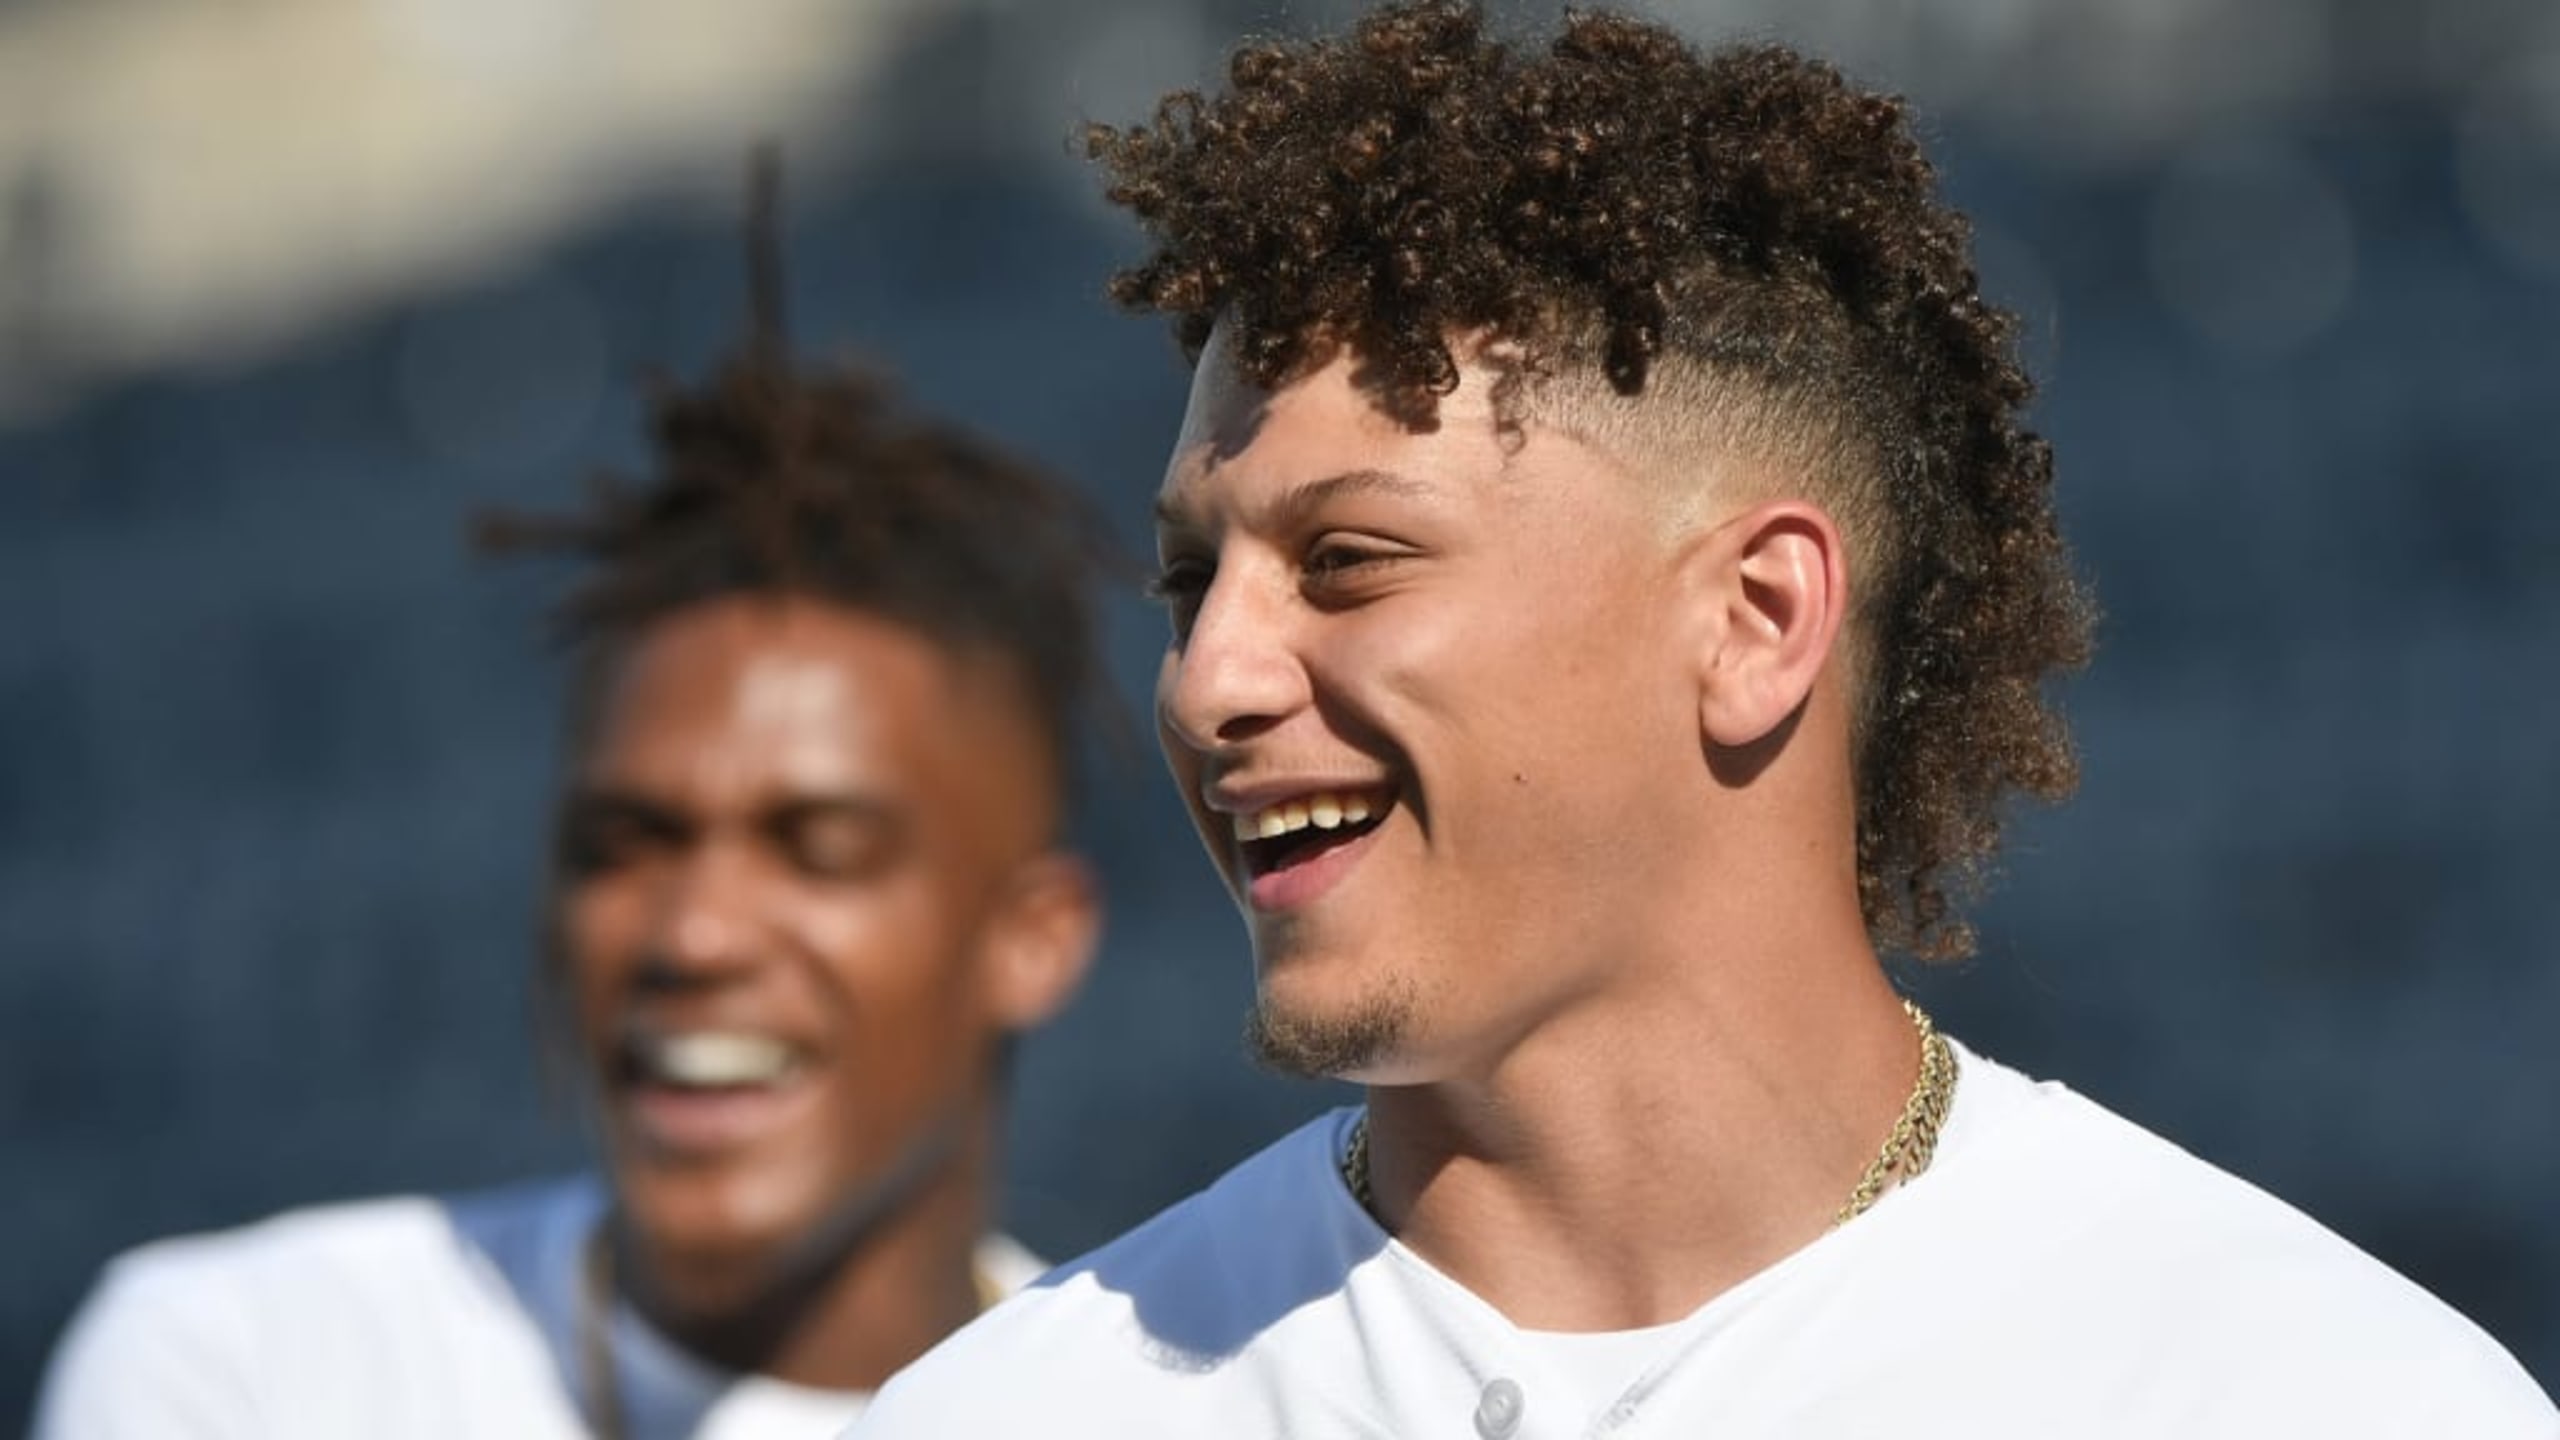 Patrick Mahomes joins the list of MLB draftees to play in a Super